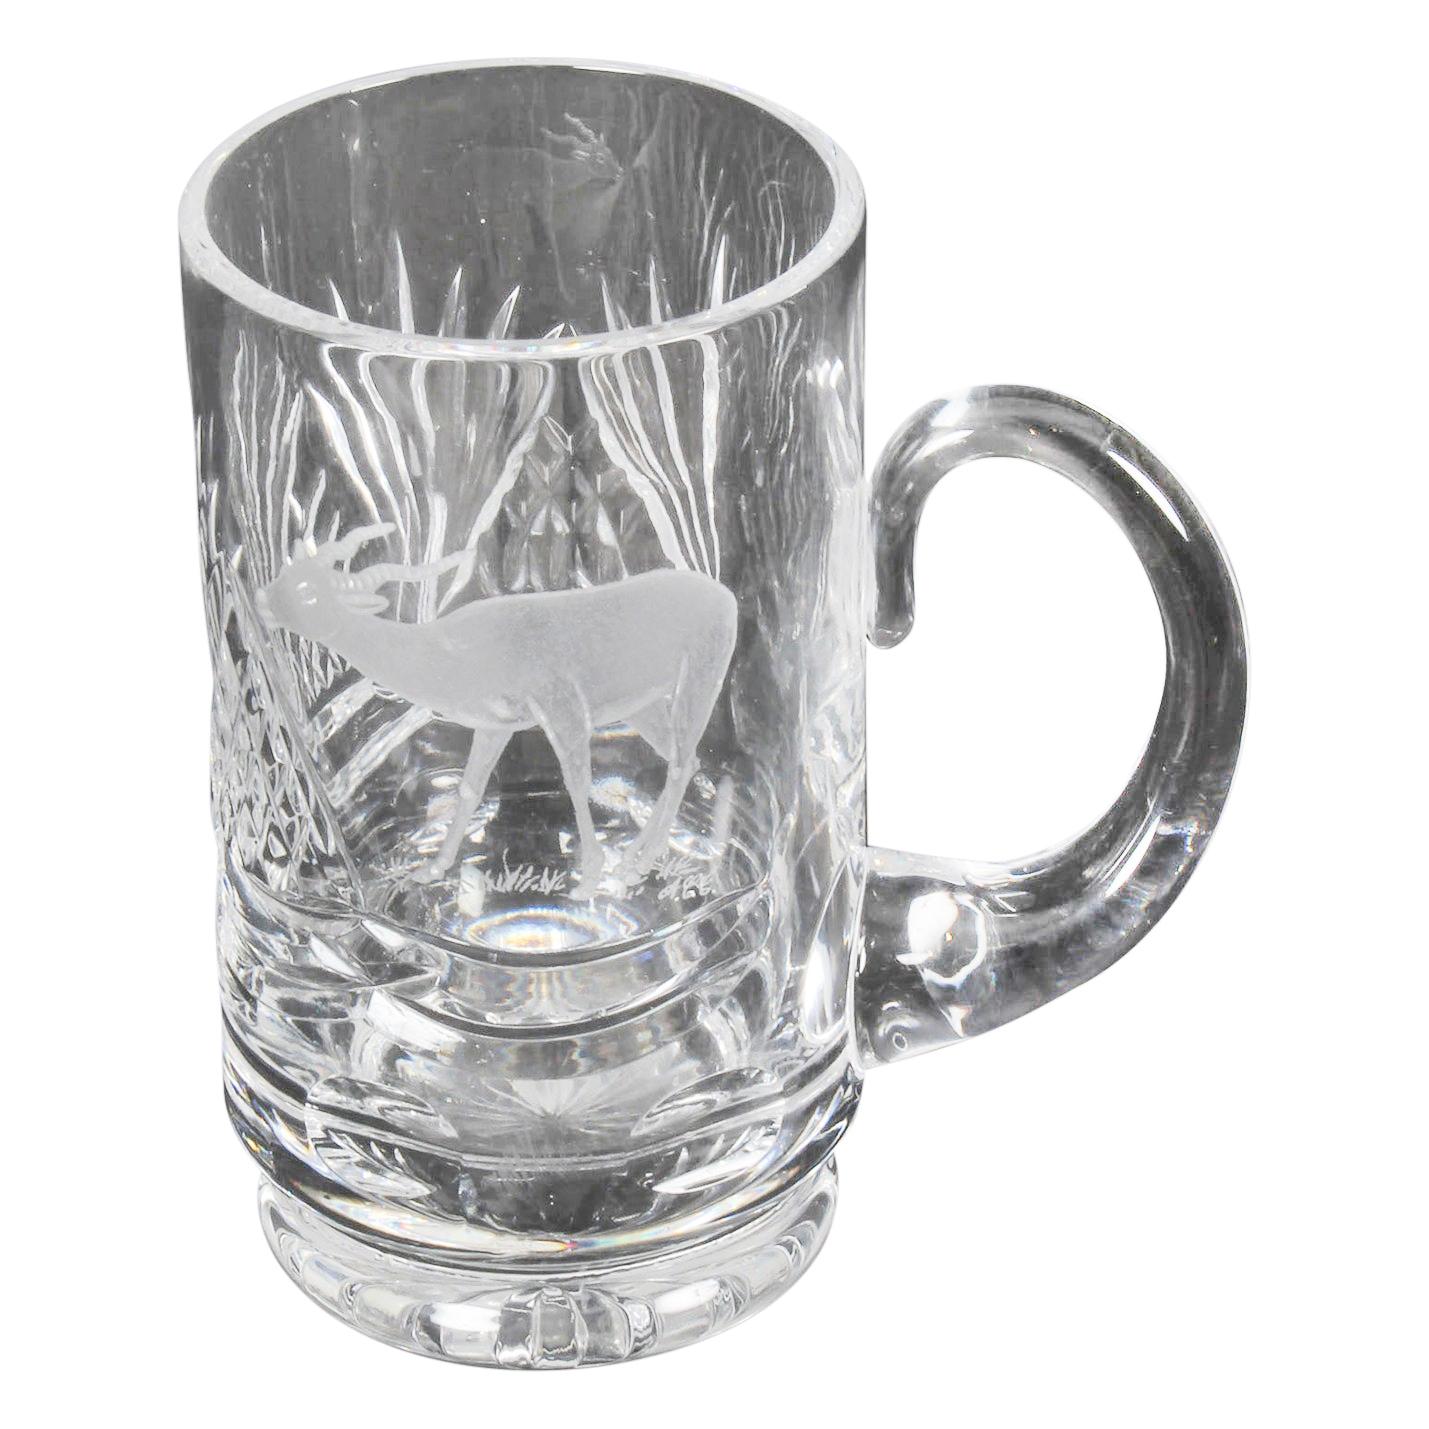 Vintage Cut Glass Tankard Engraved with Stag Signed ACC, Mid-20th Century